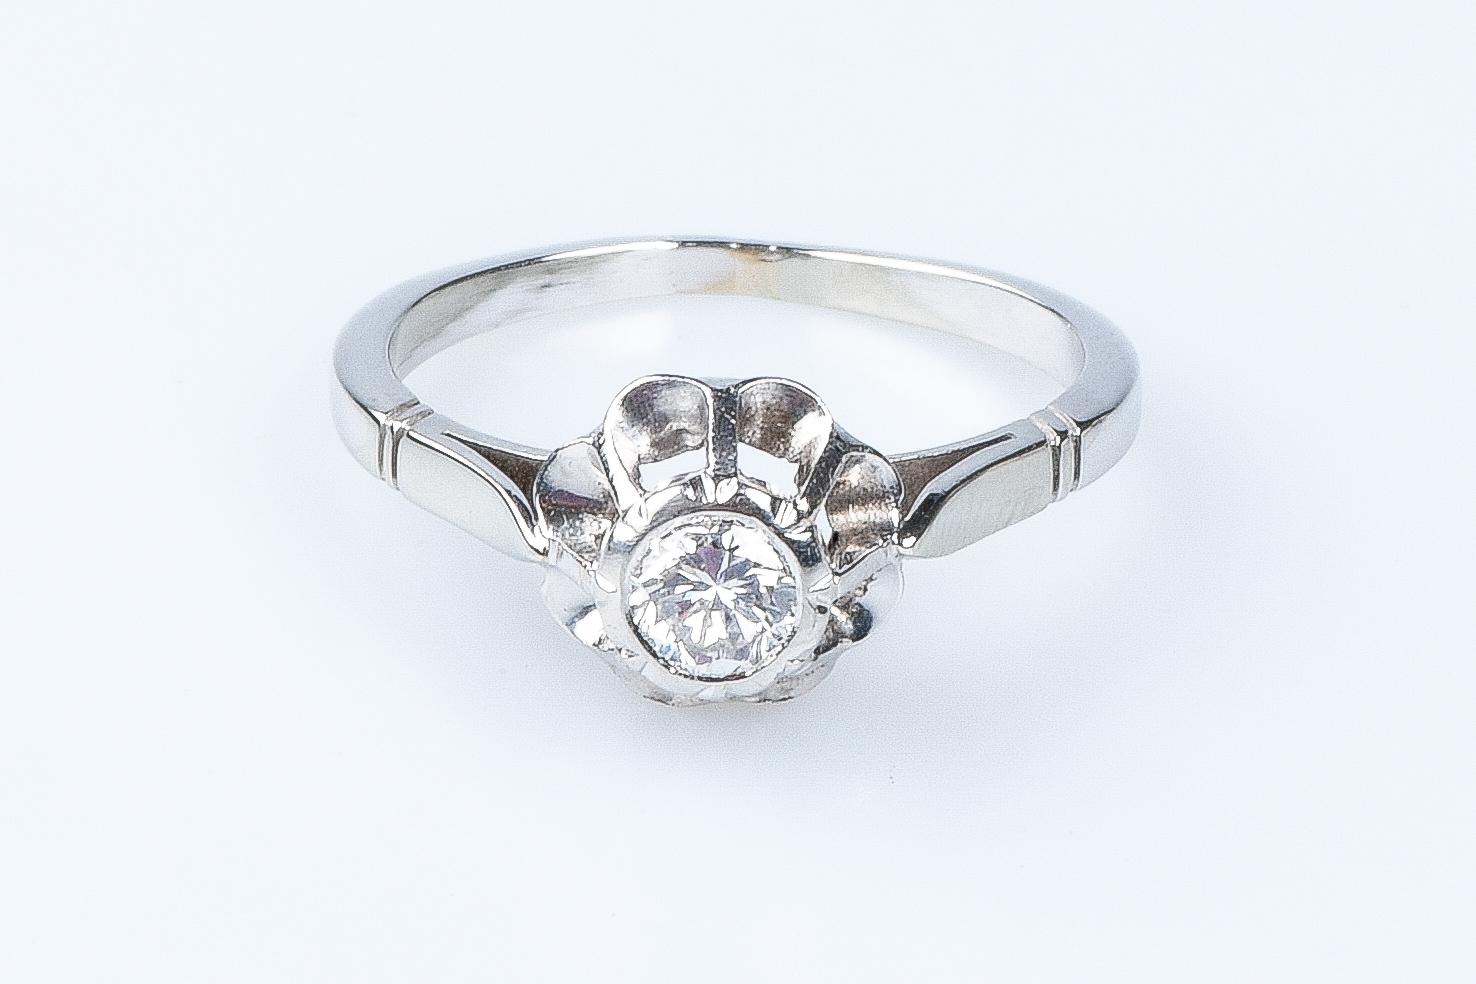 18 carat white gold flower ring designed with 1 round brillant cut diamond weighing 0.29 carat. 

Quality of the diamond
Color: H
Clarity: SI

Weight:  3.30 gr. 

Size: EU: 55 - SP/IT: 15 - US: 7.5

Dimensions : 0.90 x 0.90 x 0.15 cm 

Jewel